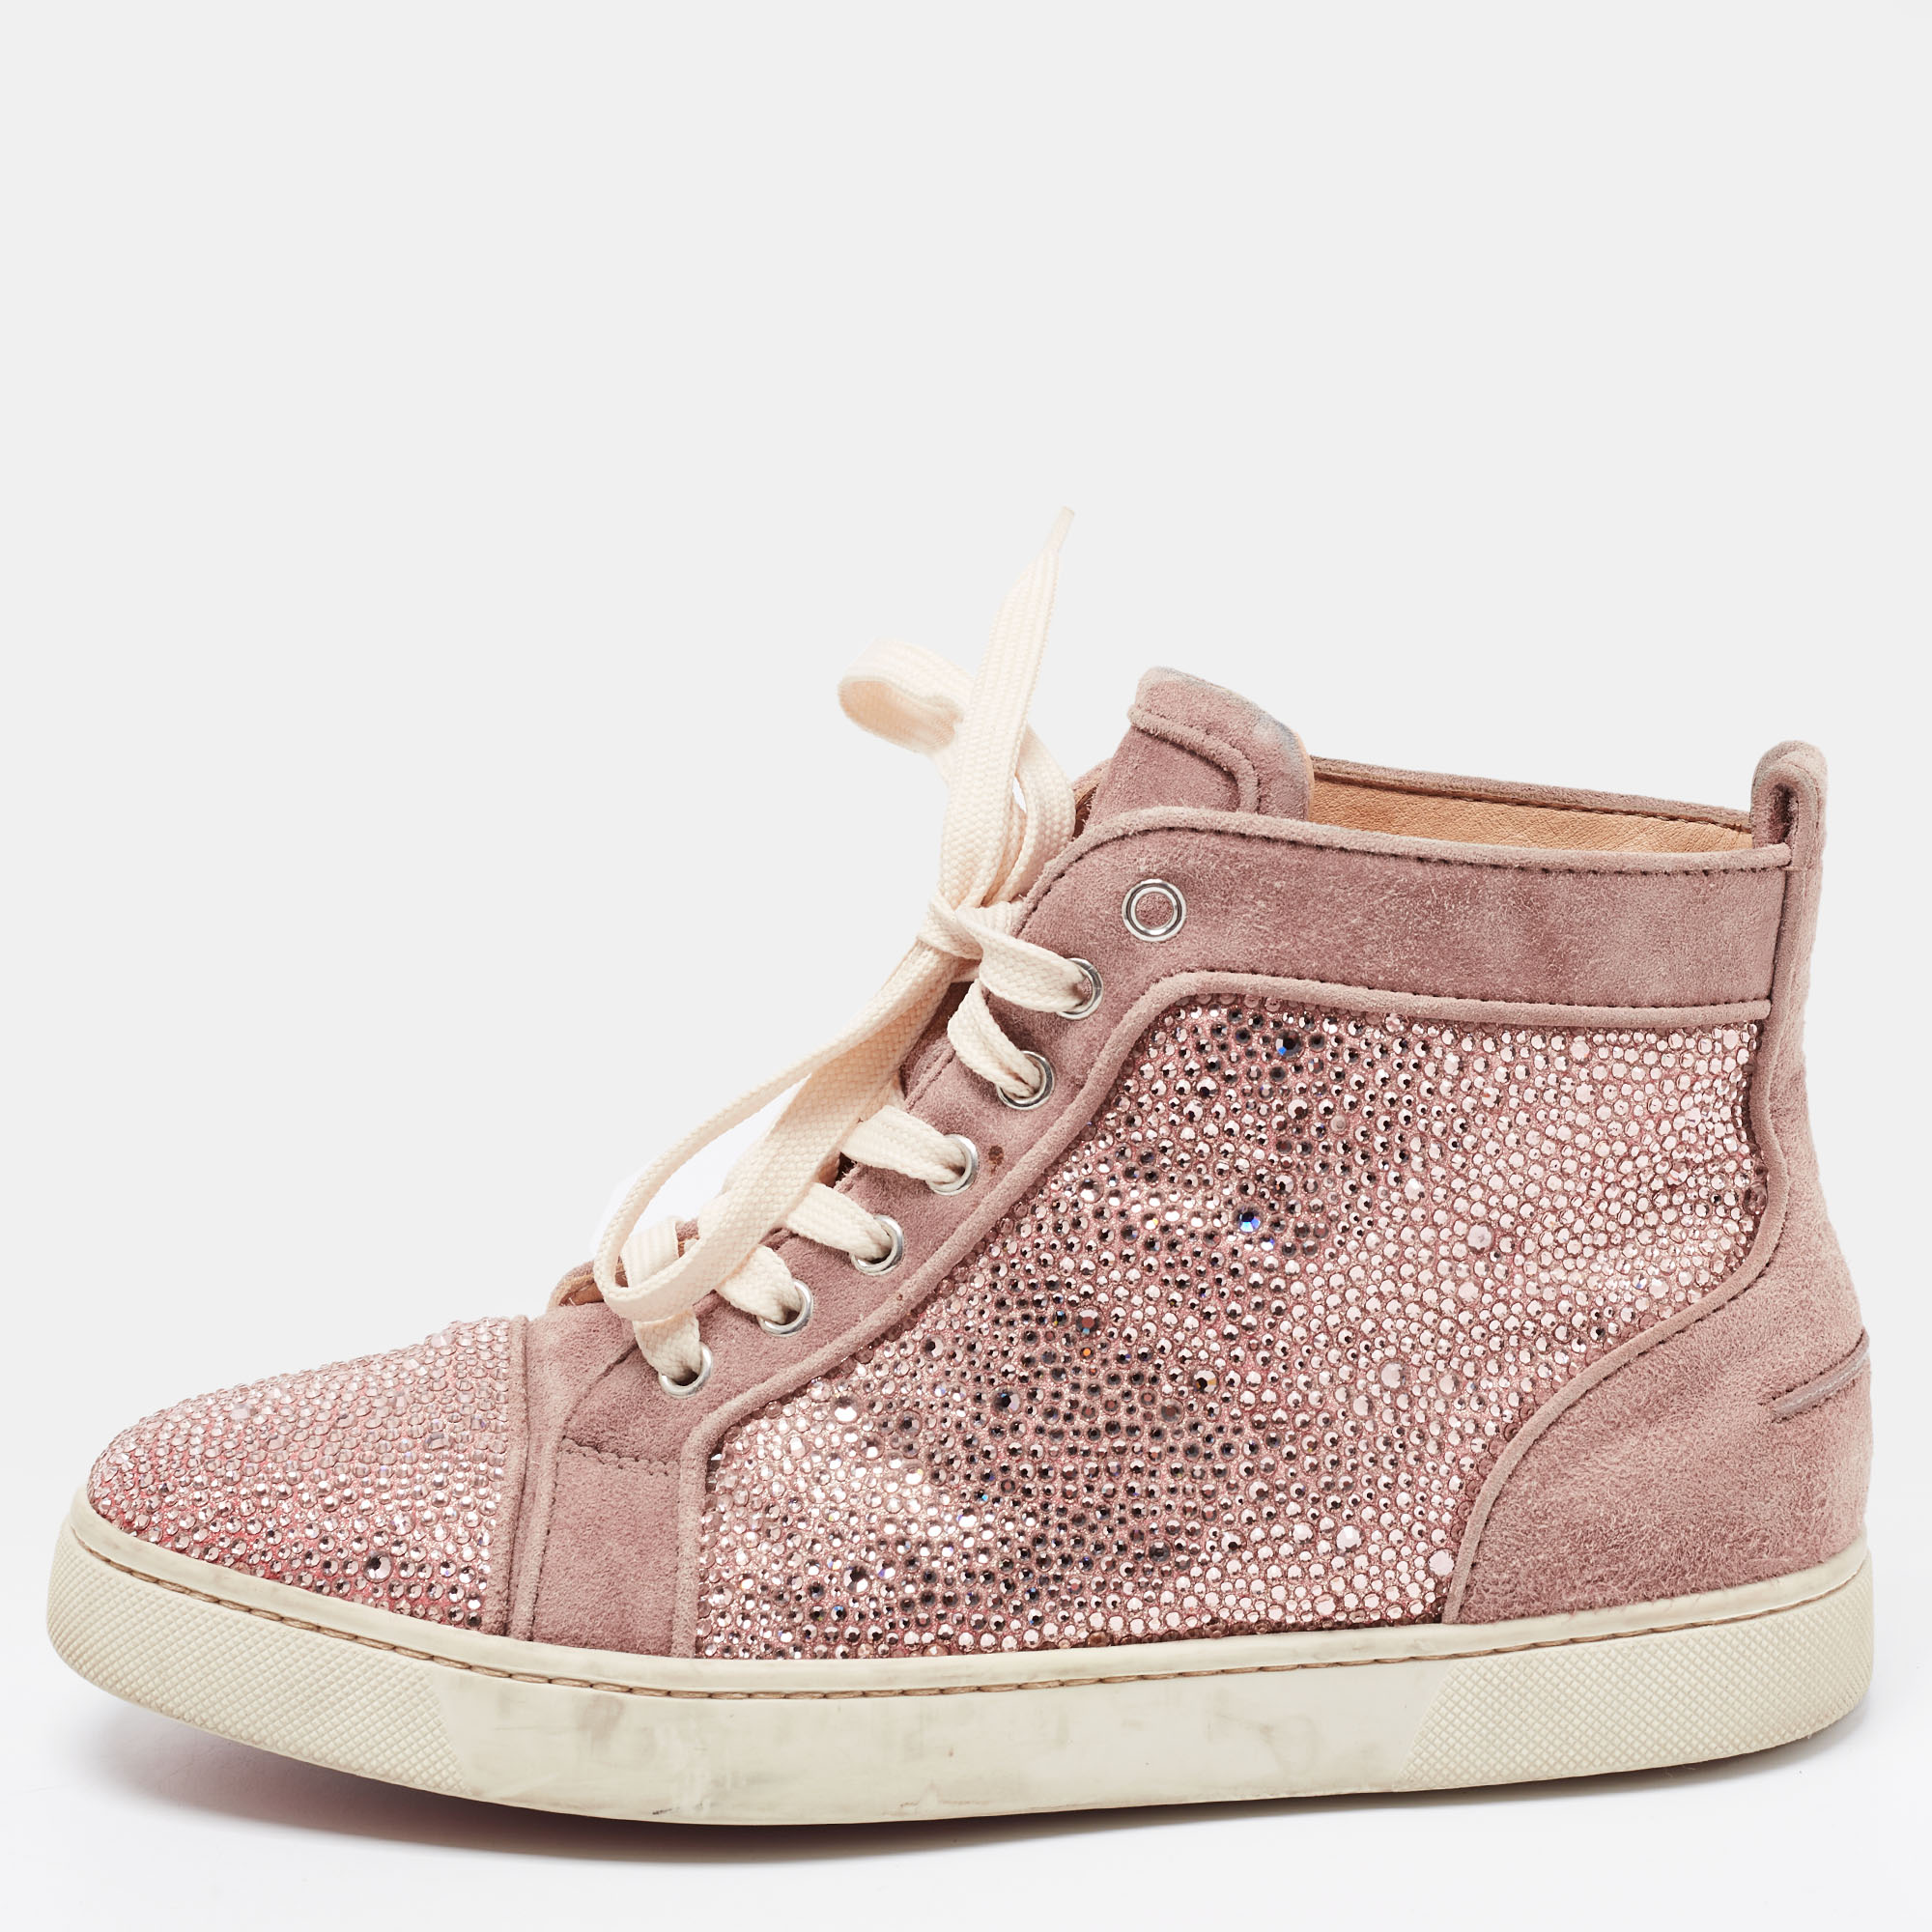 

Christian Louboutin Pink Suede Louis Flat Strass High-Top Sneakers Size